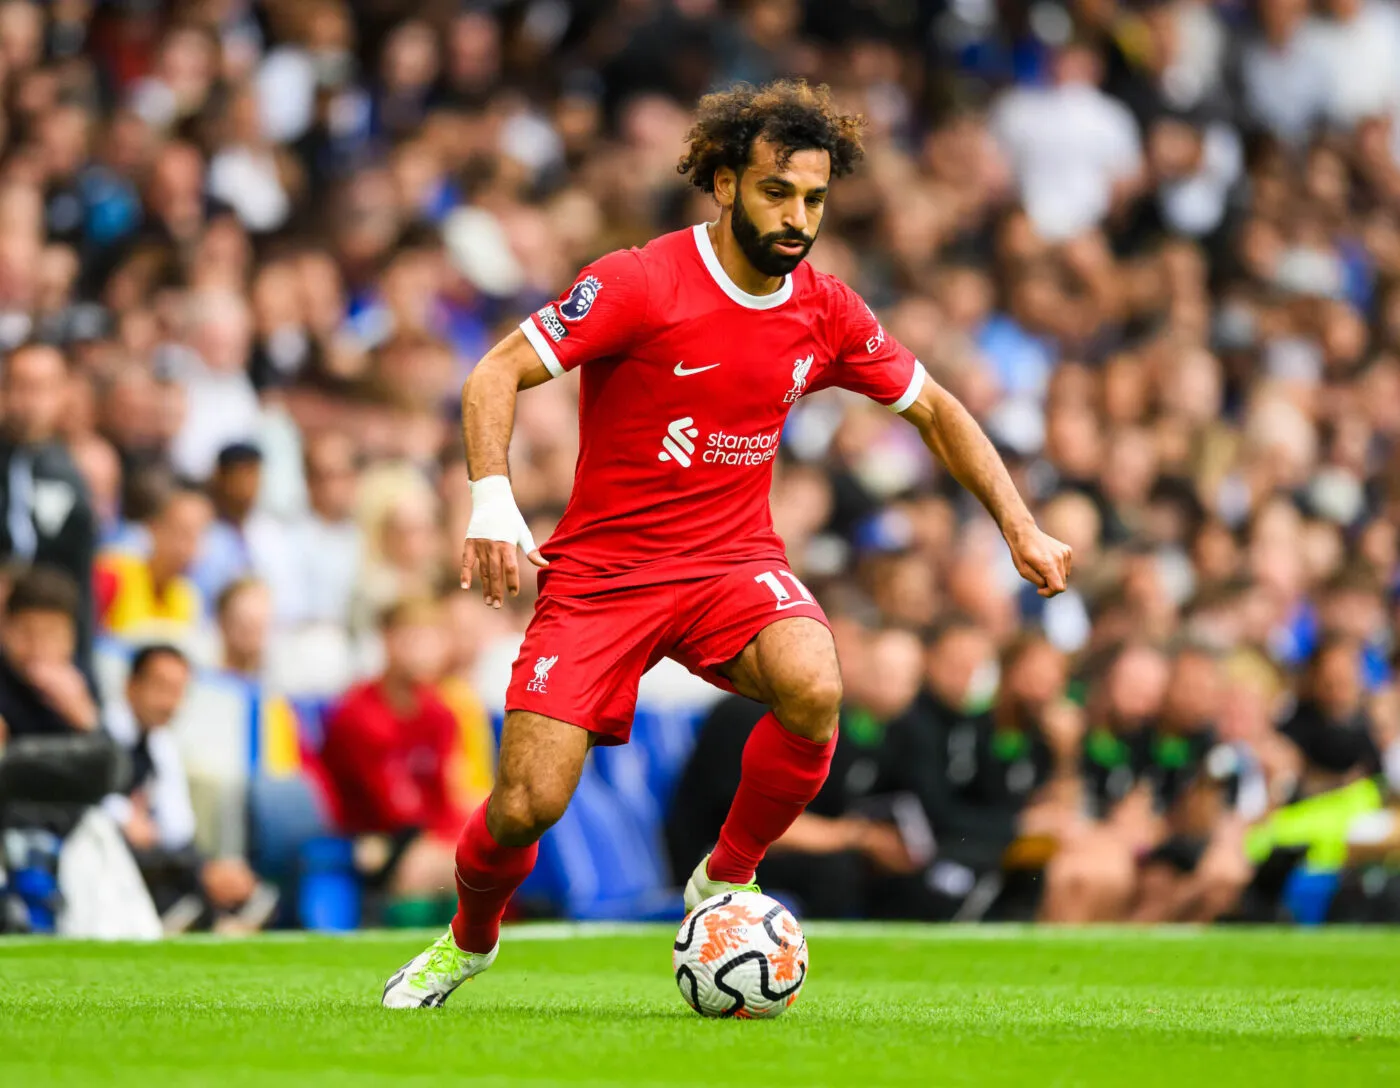 Liverpool's Mo Salah during the Premier League match at Stamford Bridge, London. - Photo by Icon sport